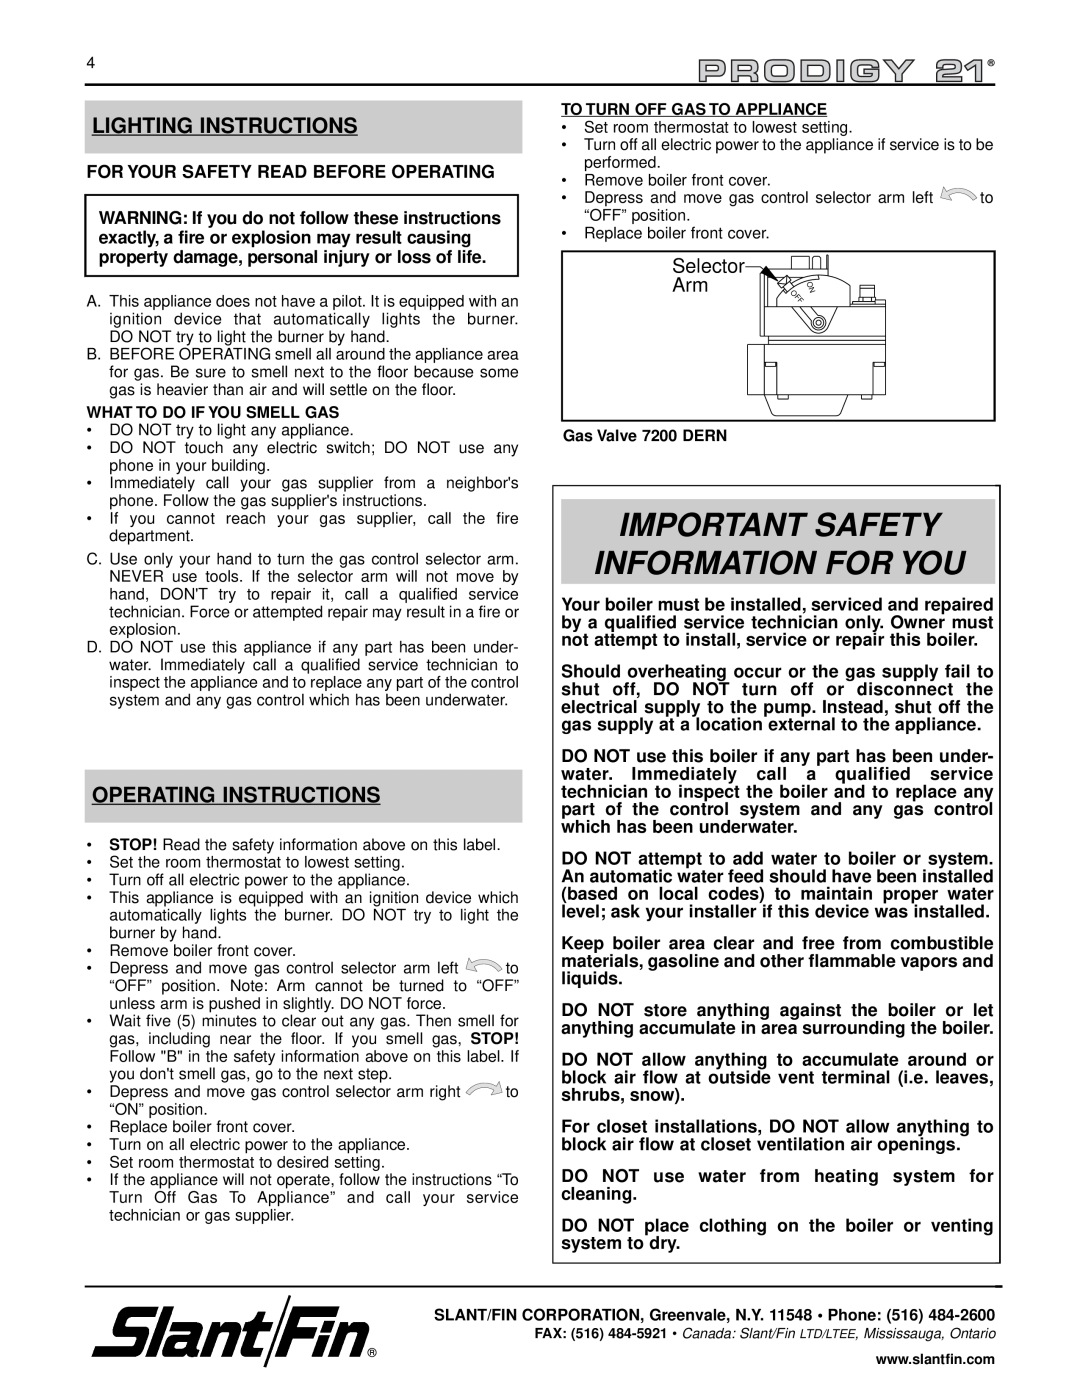 Slant/Fin KC-90, KC-45 manual Important Safety Information For You, Lighting Instructions, Operating Instructions, Selector 